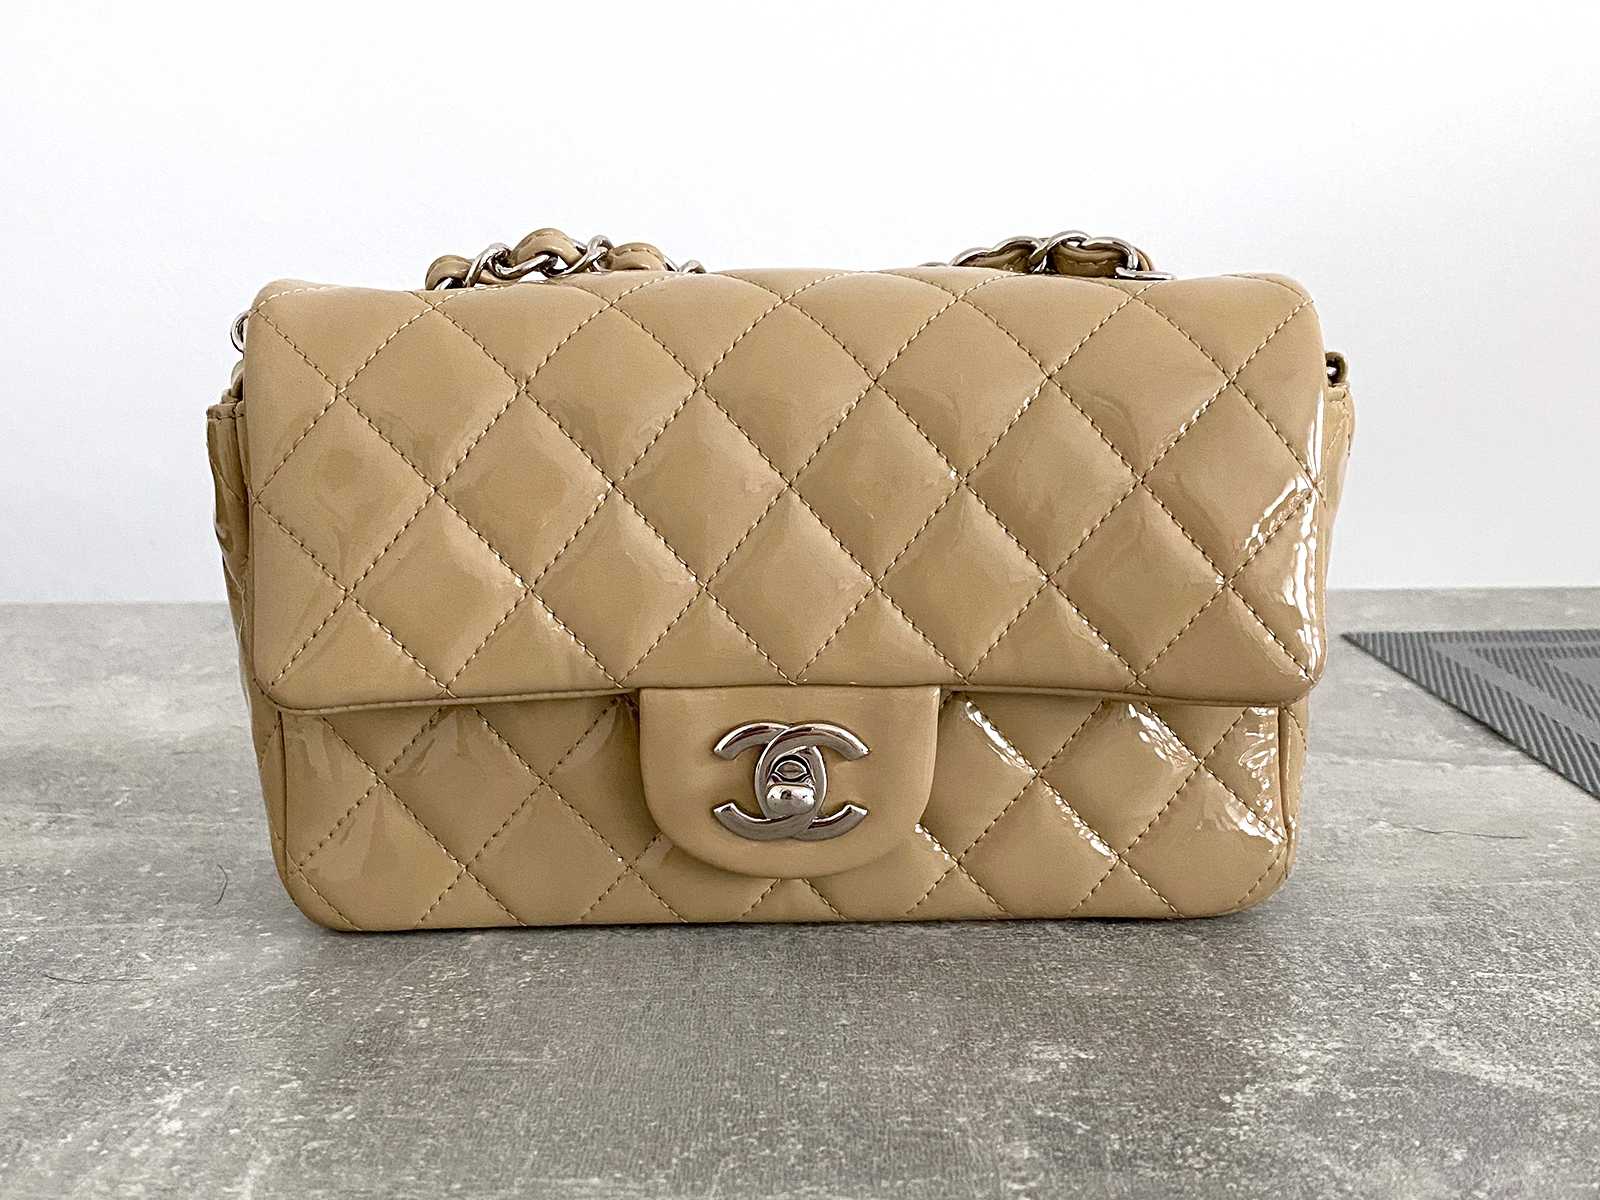 Antigona Givenchy Bag  Buy or Sell your Luxury Bags for women online! -  Vestiaire Collective